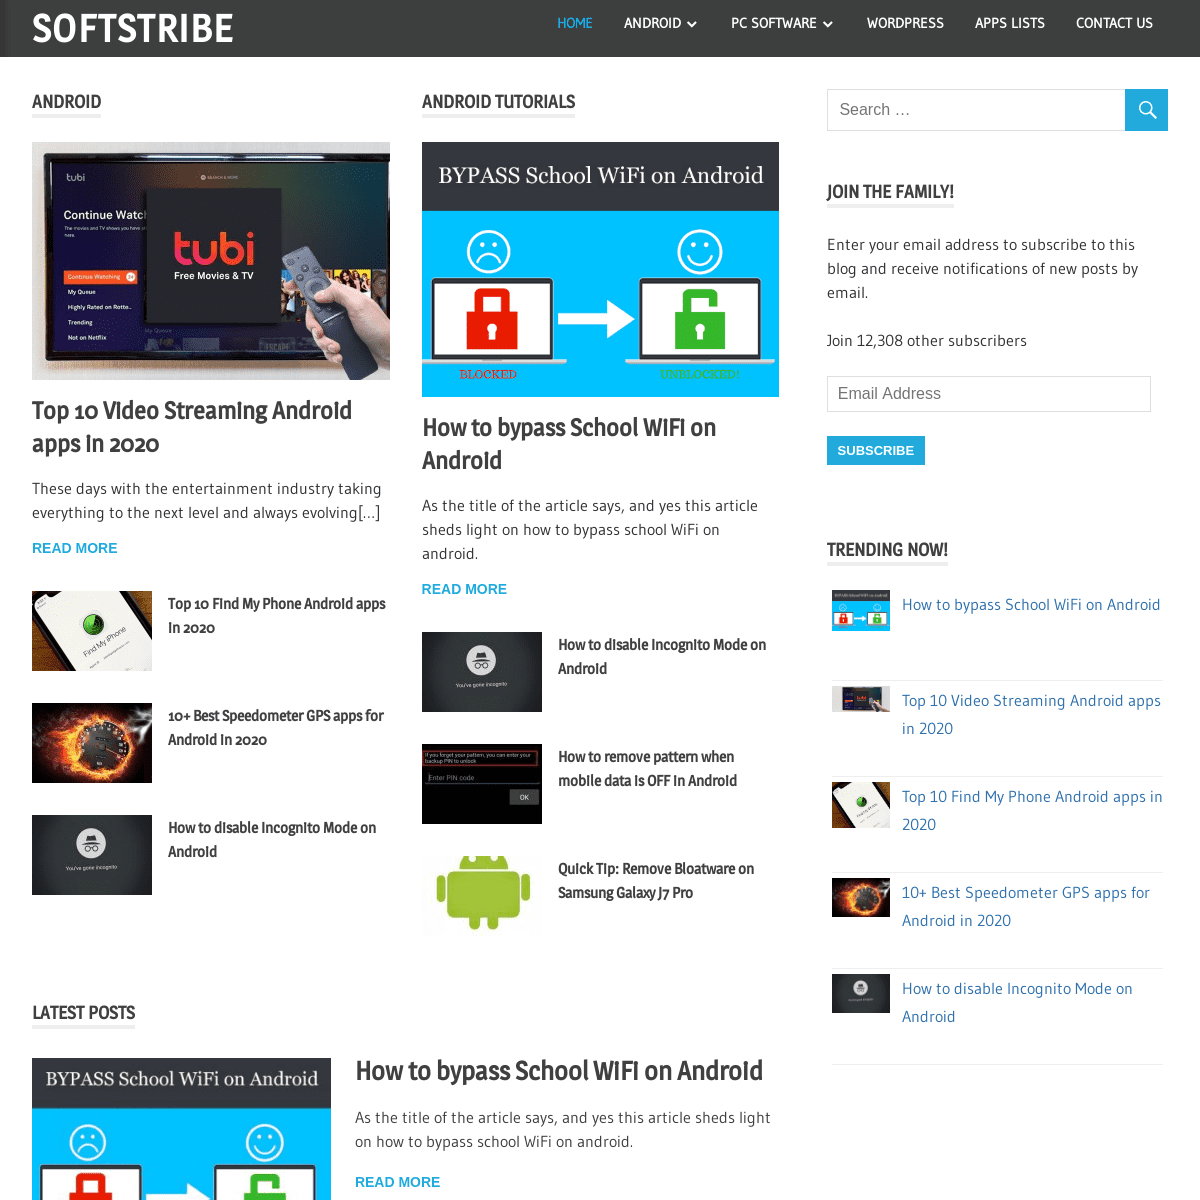 A complete backup of softstribe.com